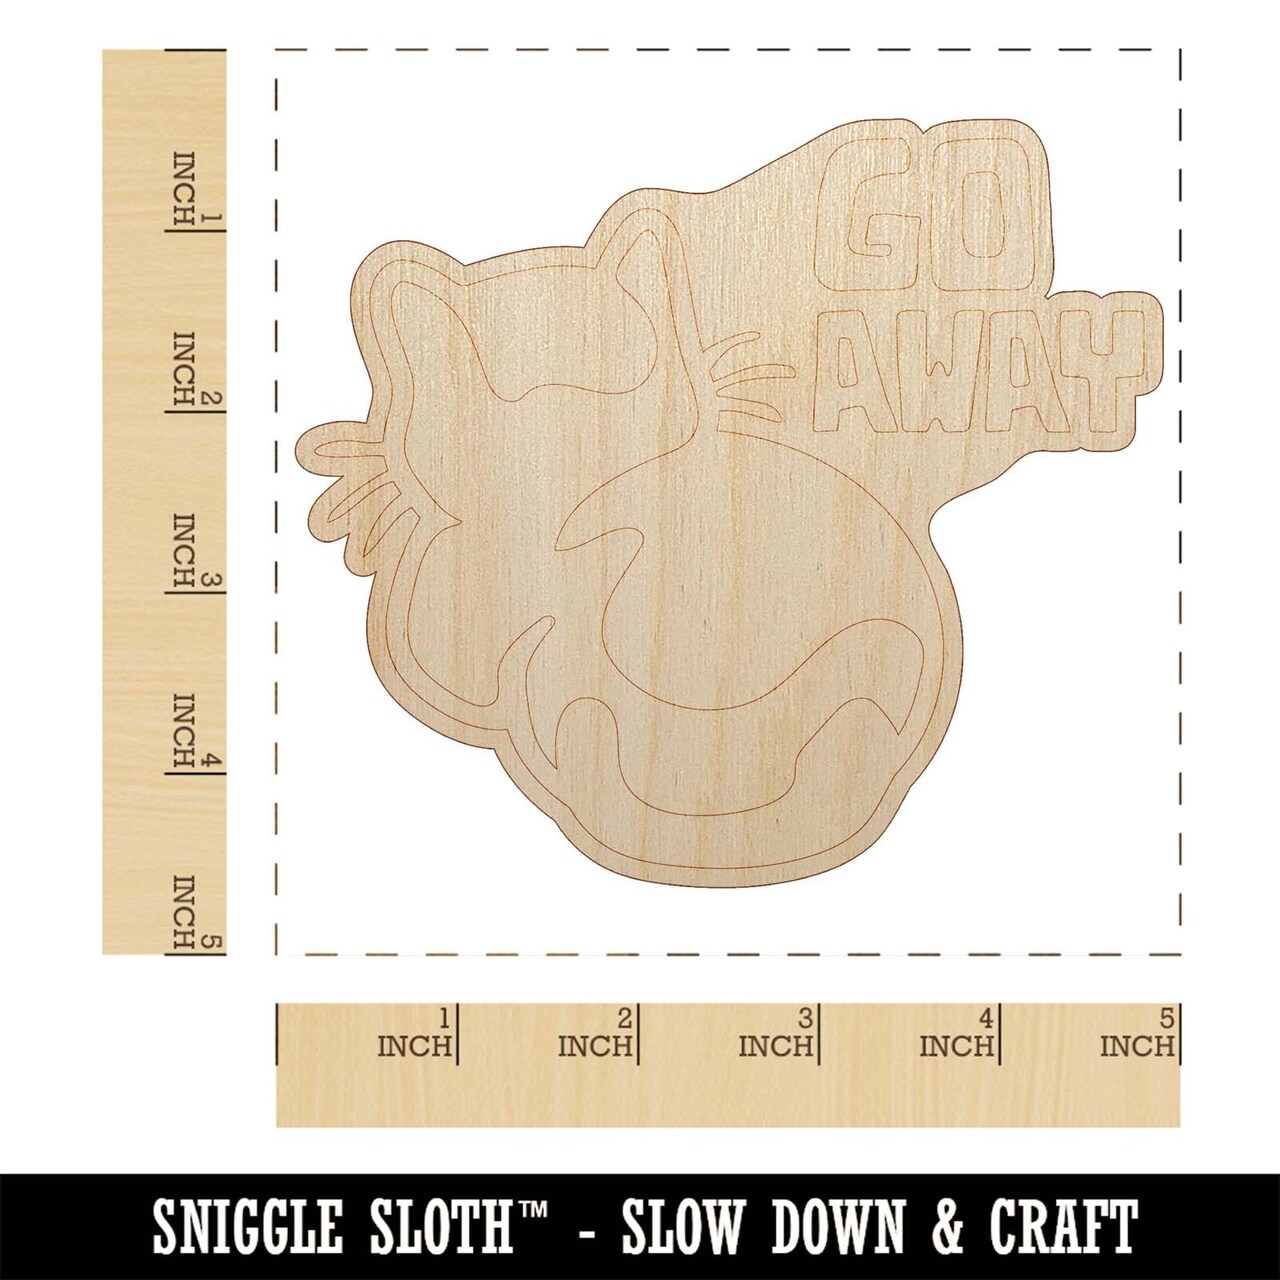 Go Away the Cat is Ignoring You Unfinished Wood Shape Piece Cutout for DIY Craft Projects